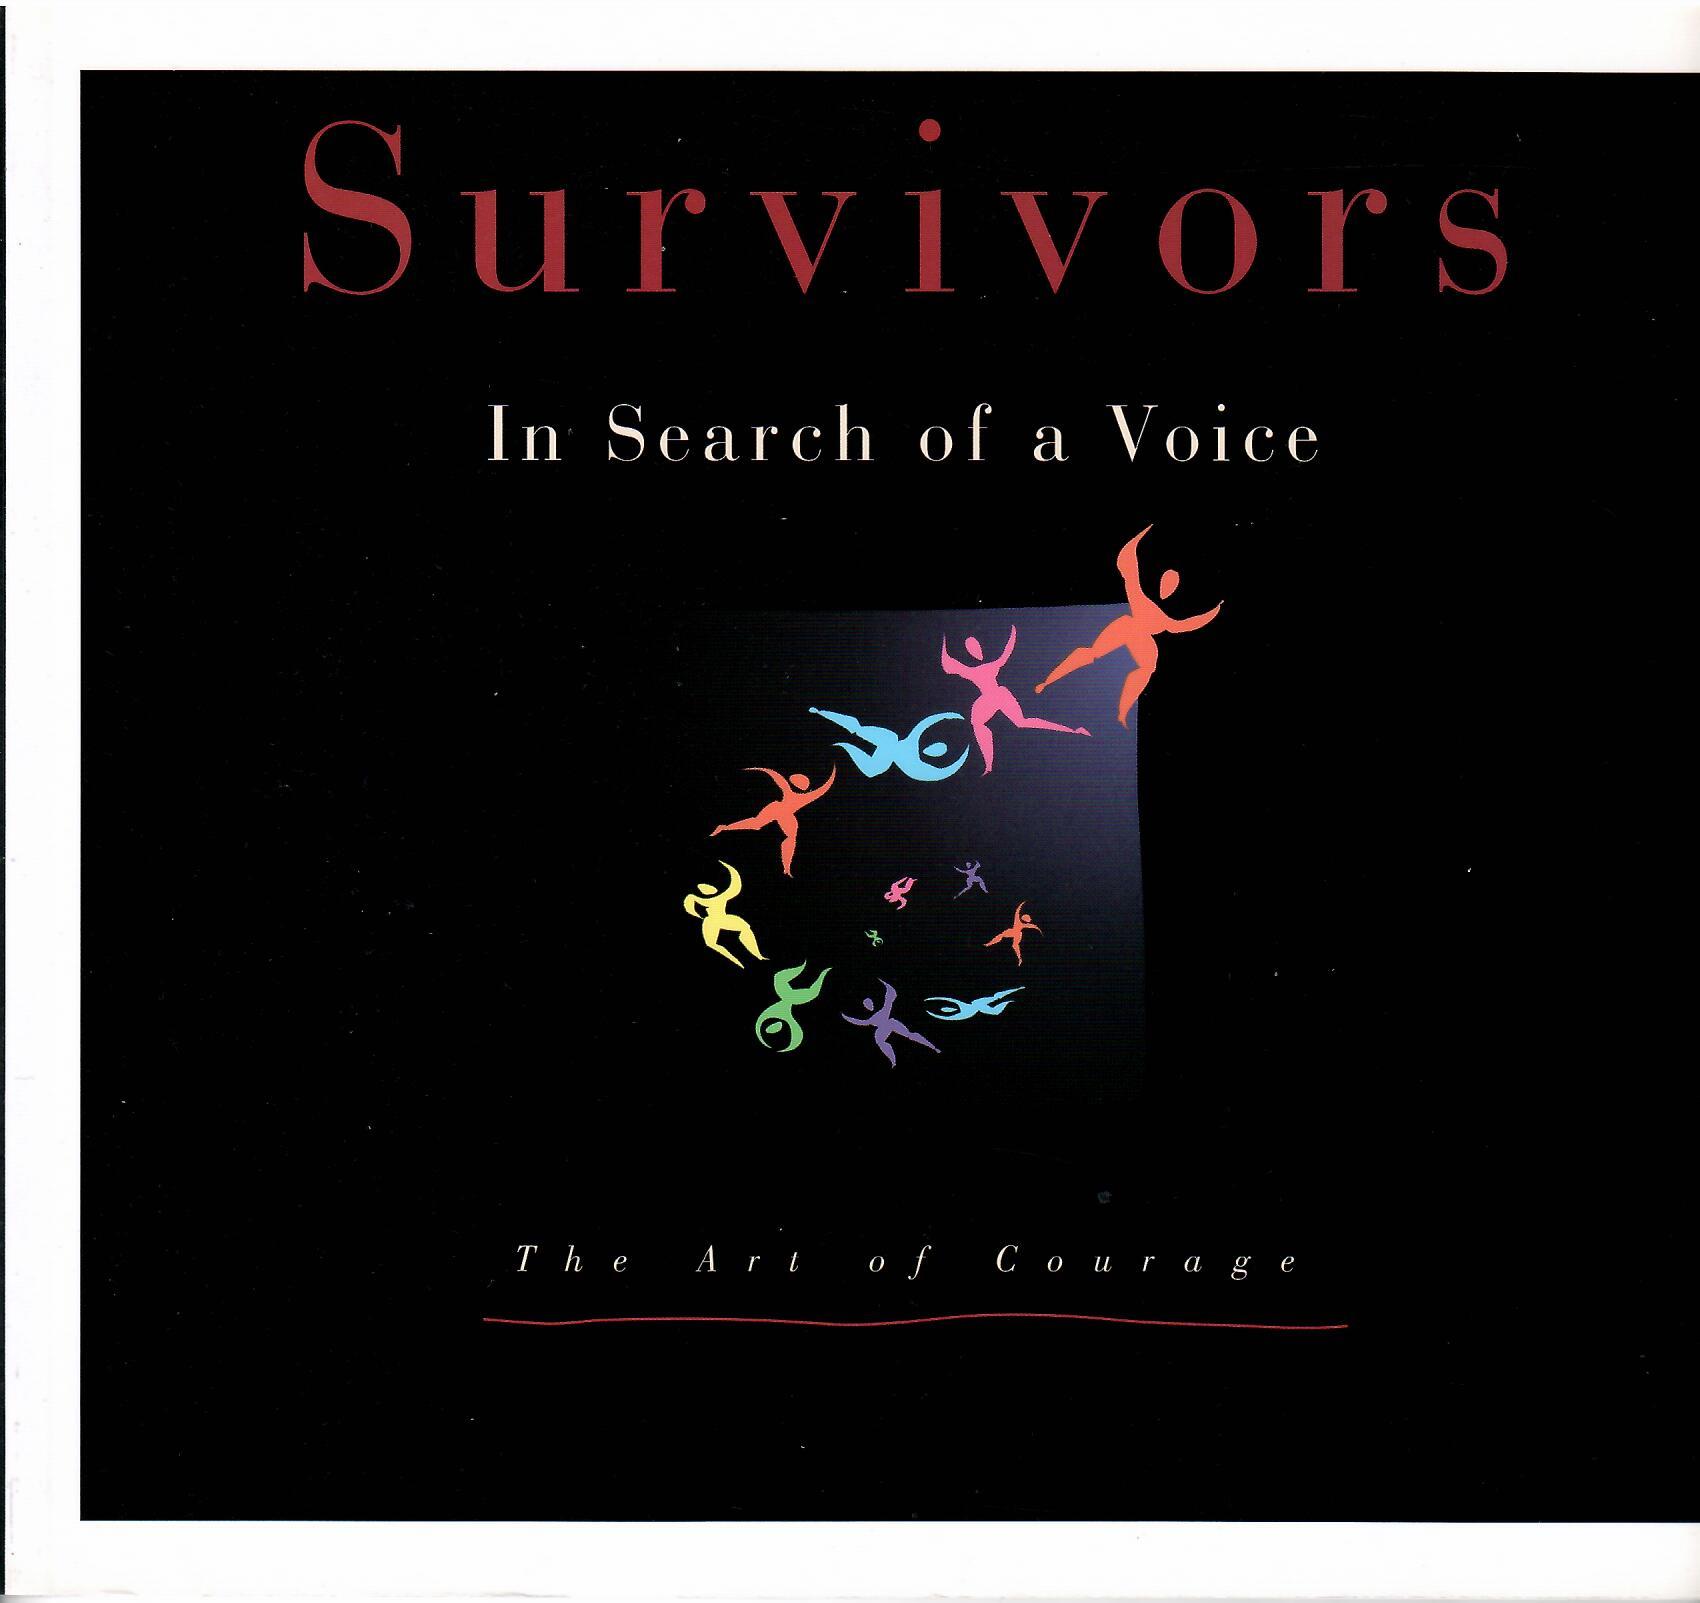 Image for In Search of a Voice - the Art of Courage; SURVIVORS